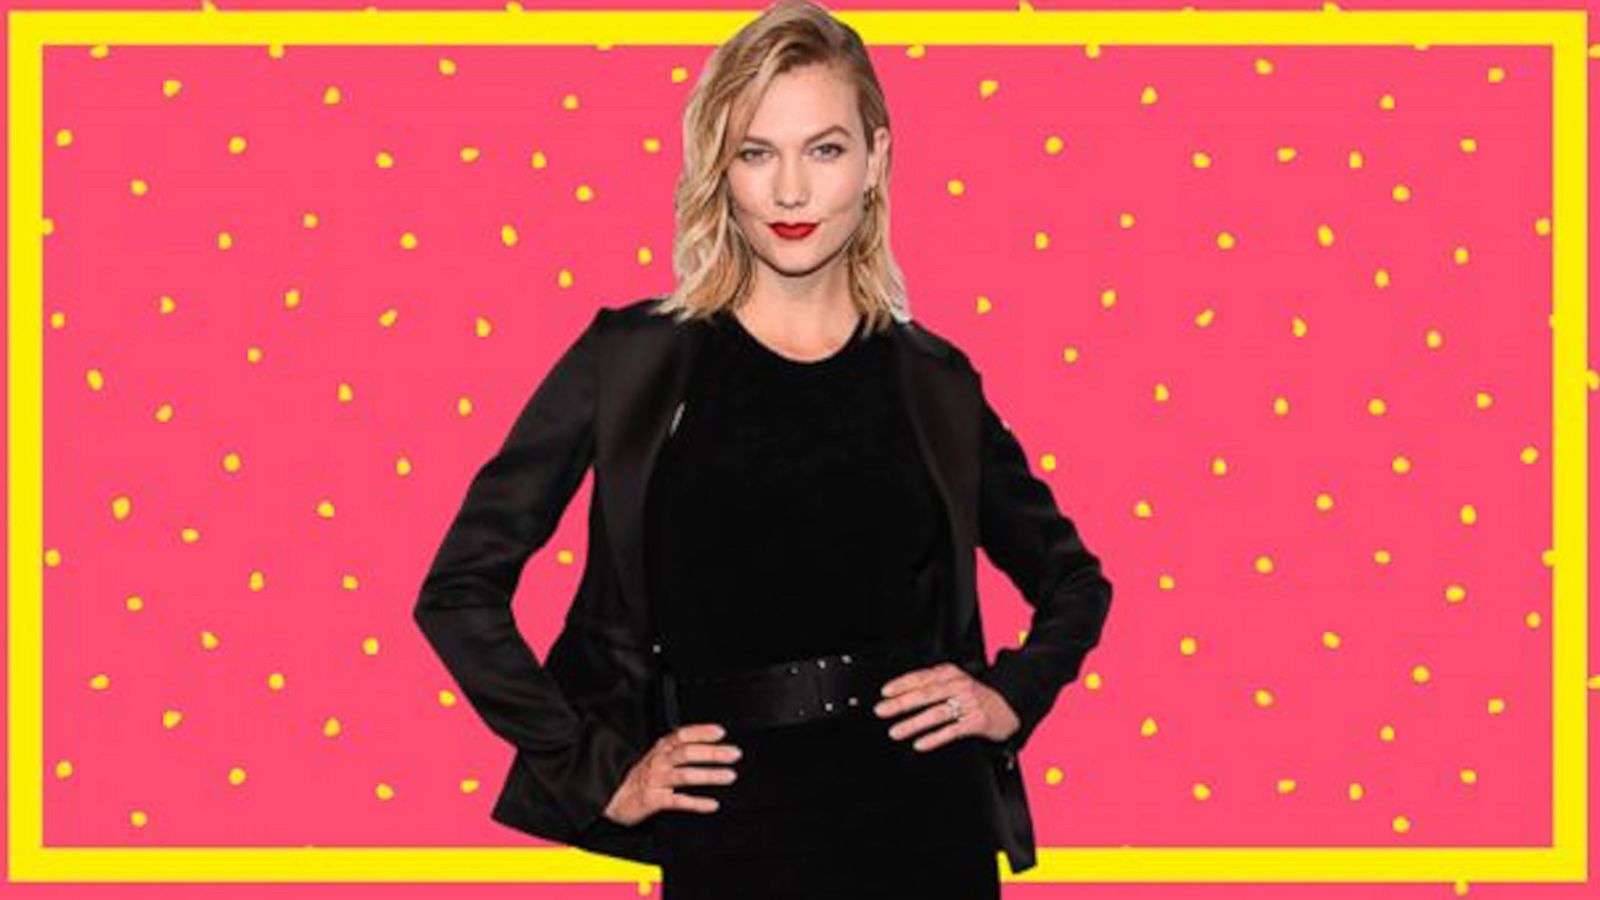 VIDEO: Supermodel Karlie Kloss on the worst advice she never took: Someone tried to change my runway walk